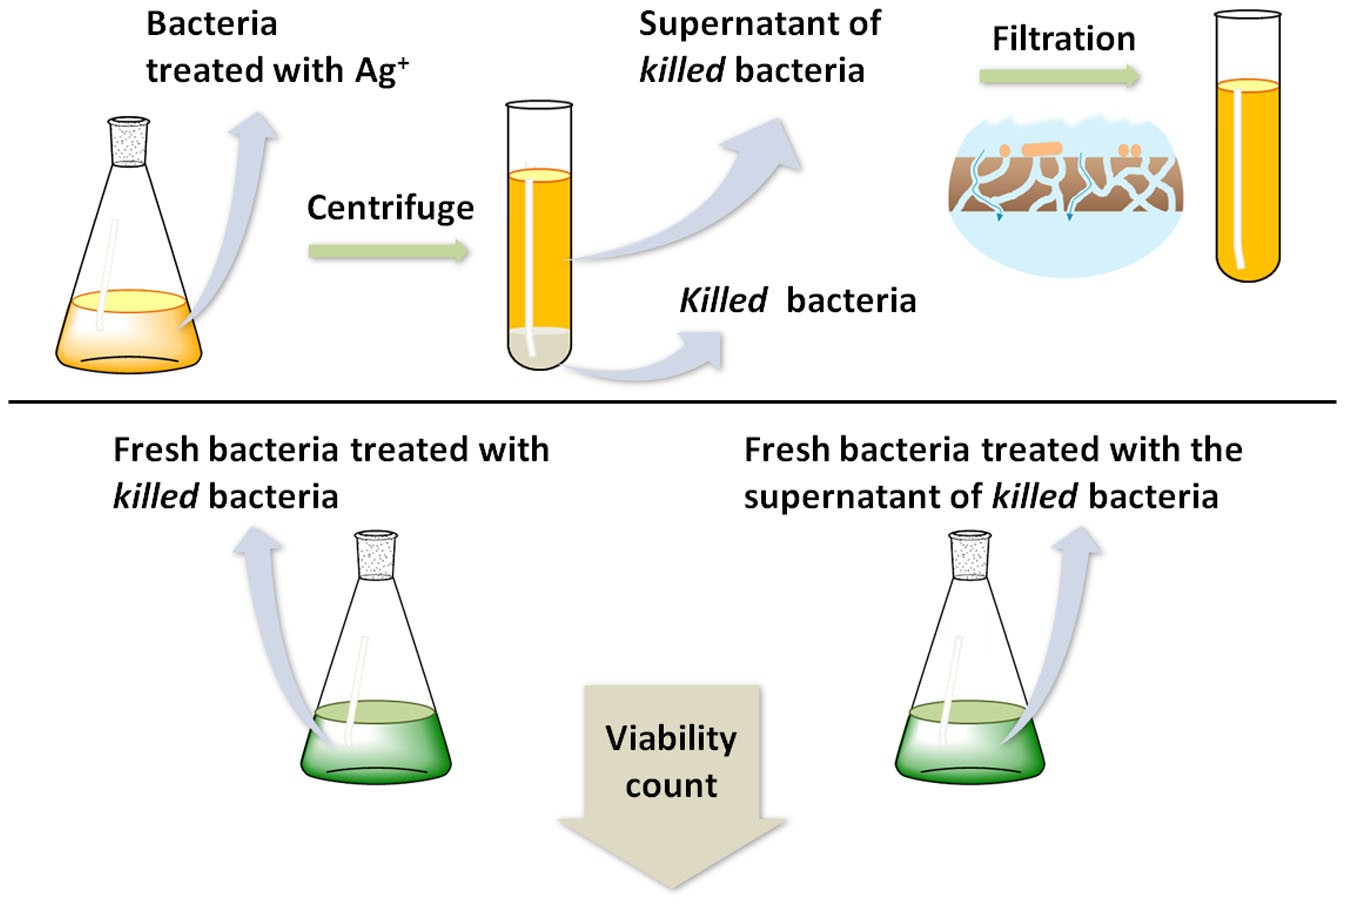 Antibacterial activity of silver-killed bacteria: the "zombies" effect |  Scientific Reports